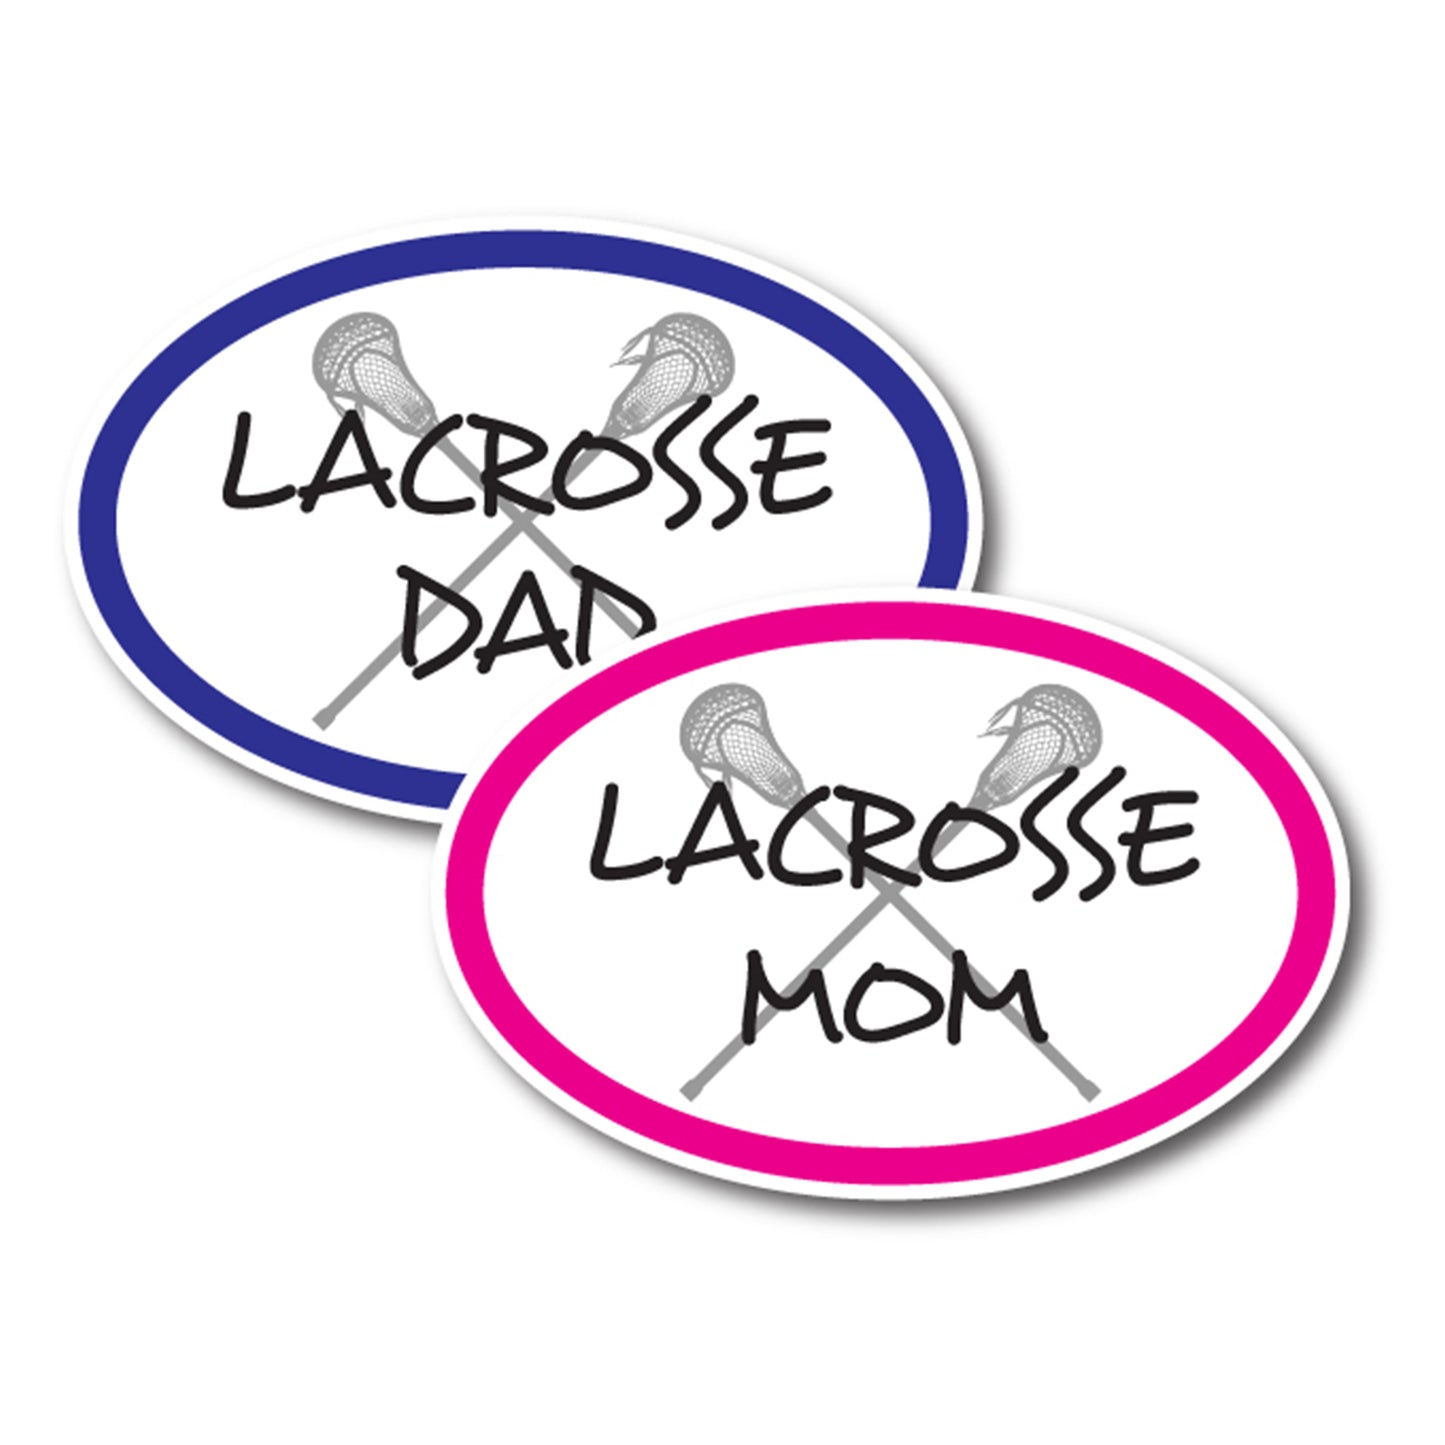 Lacrosse Mom and Lacrosse Dad - Combo Pack -Car Magnets 4 x 6 Oval Heavy Duty for Car Truck SUV Waterproof …